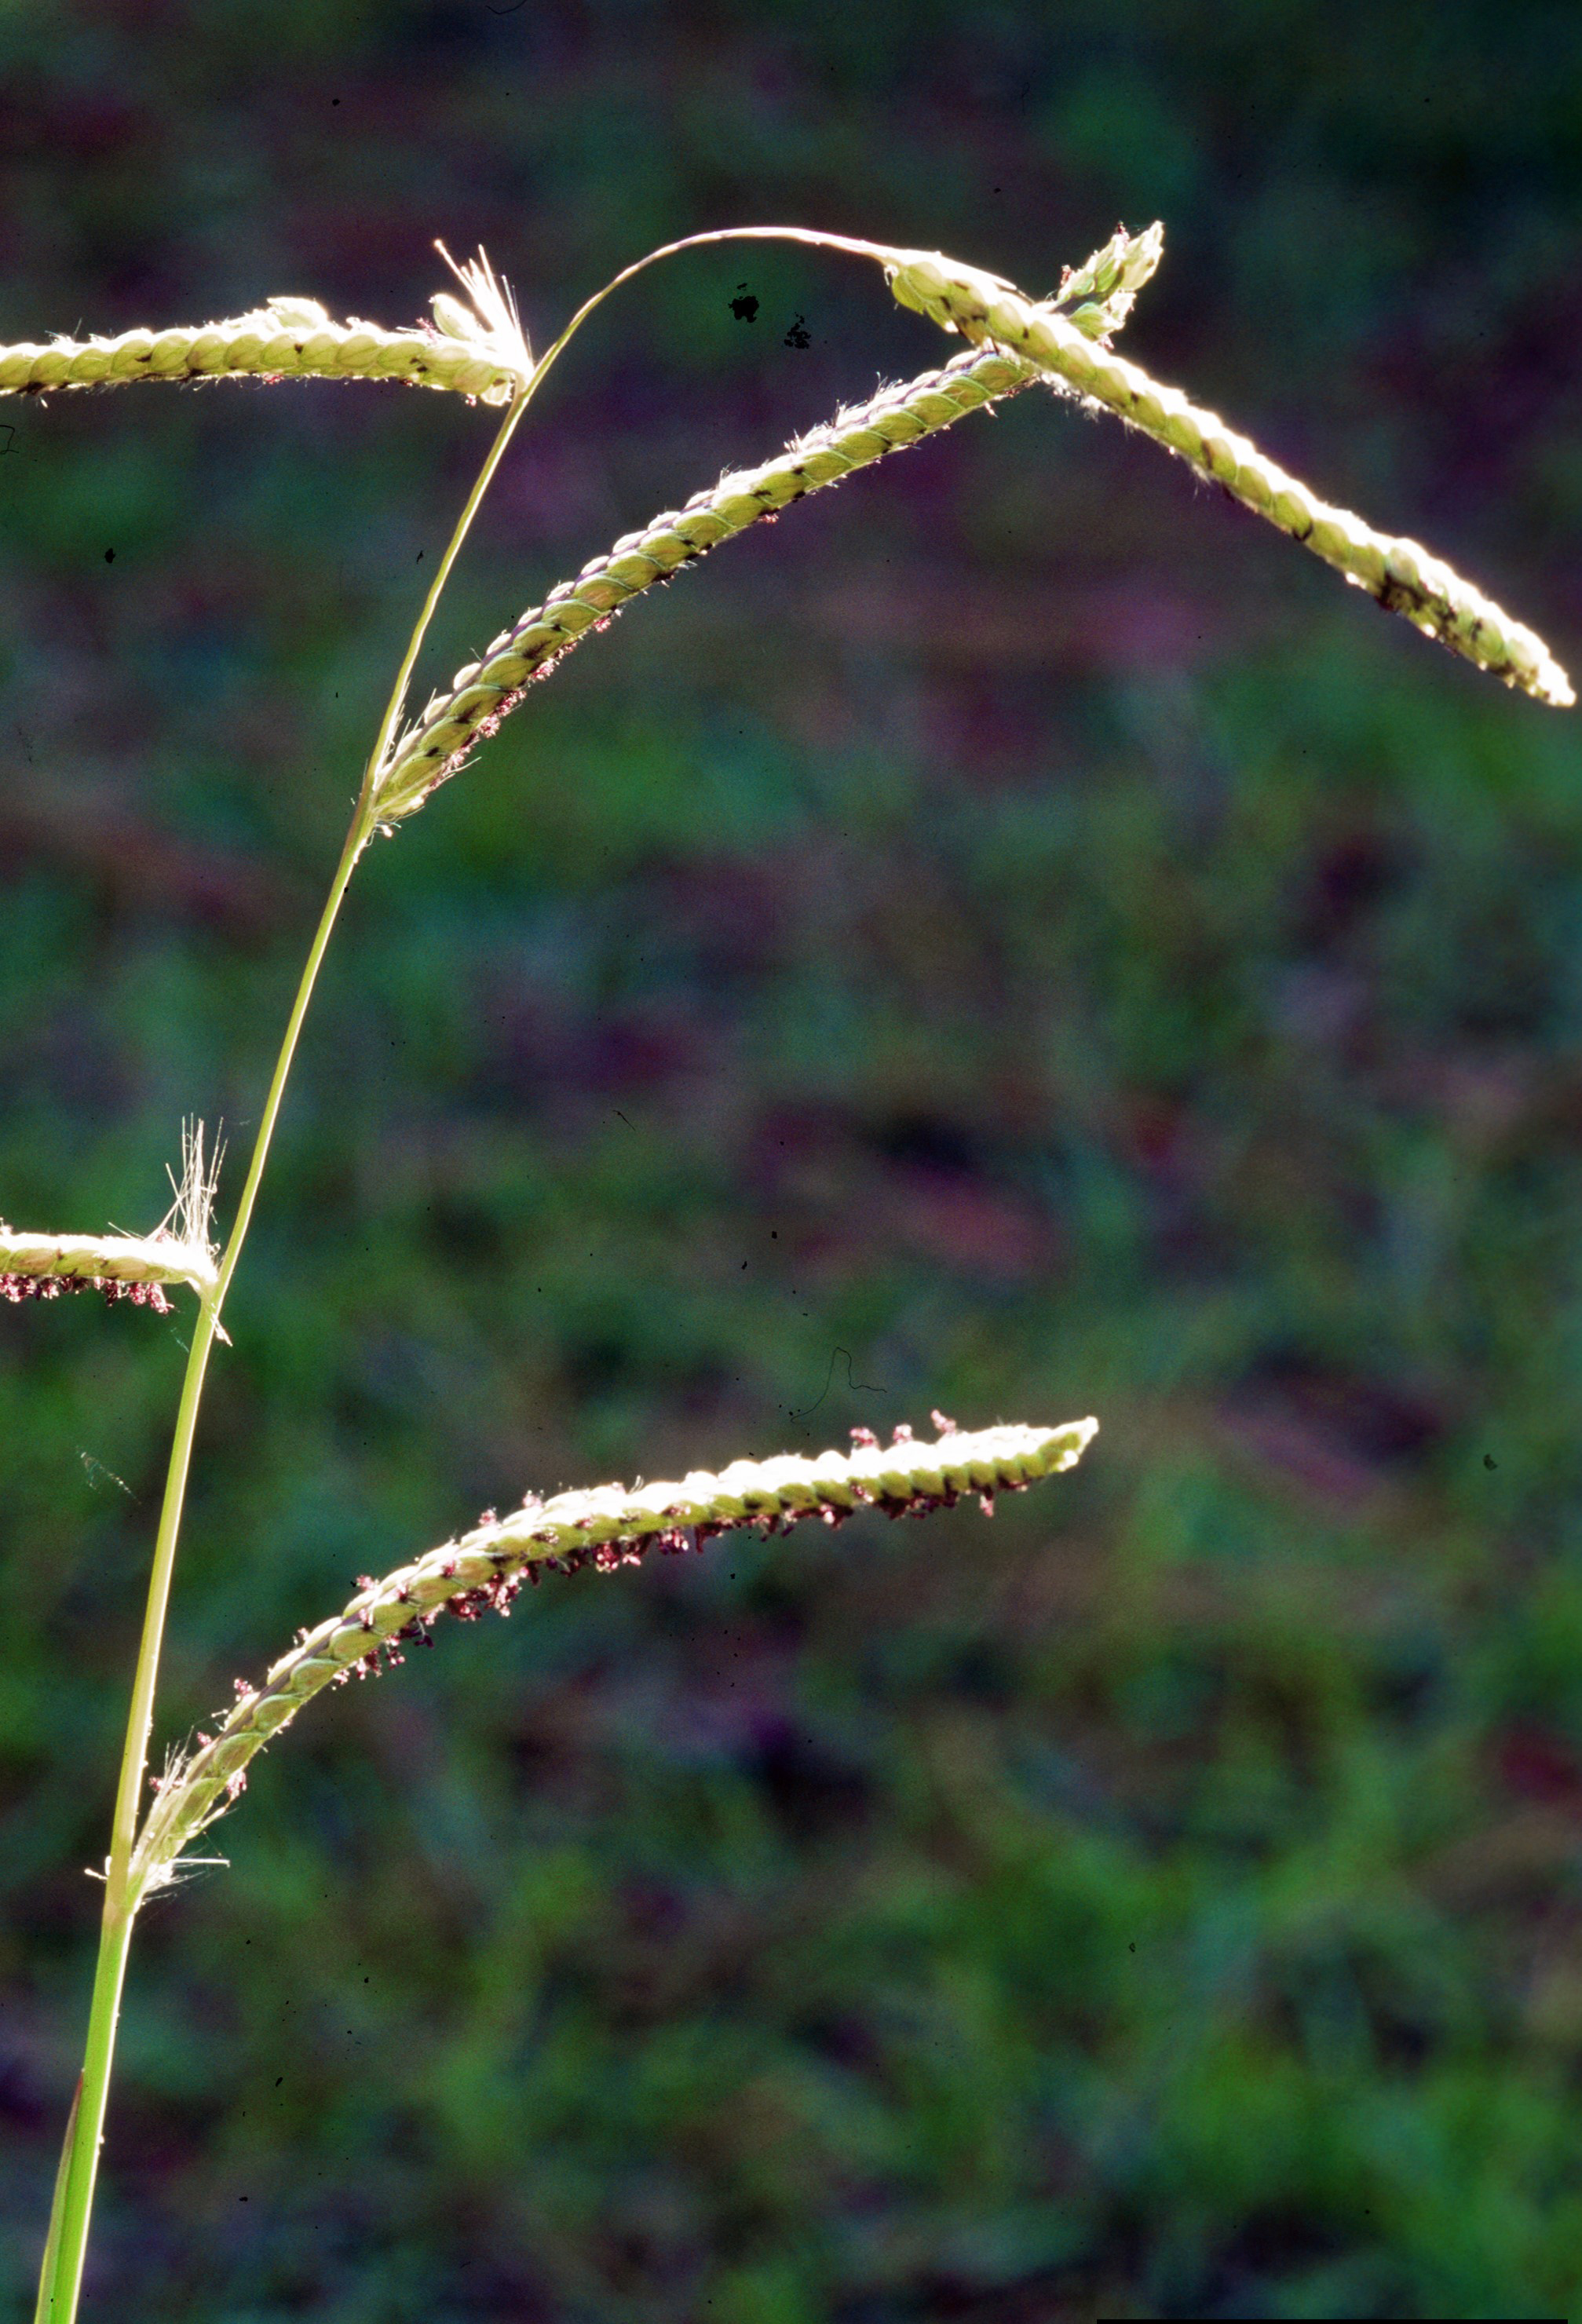 Dallisgrass (Photo: James H. Miller & Ted Bodner, Southern Weed Science Society, Bugwood.org)